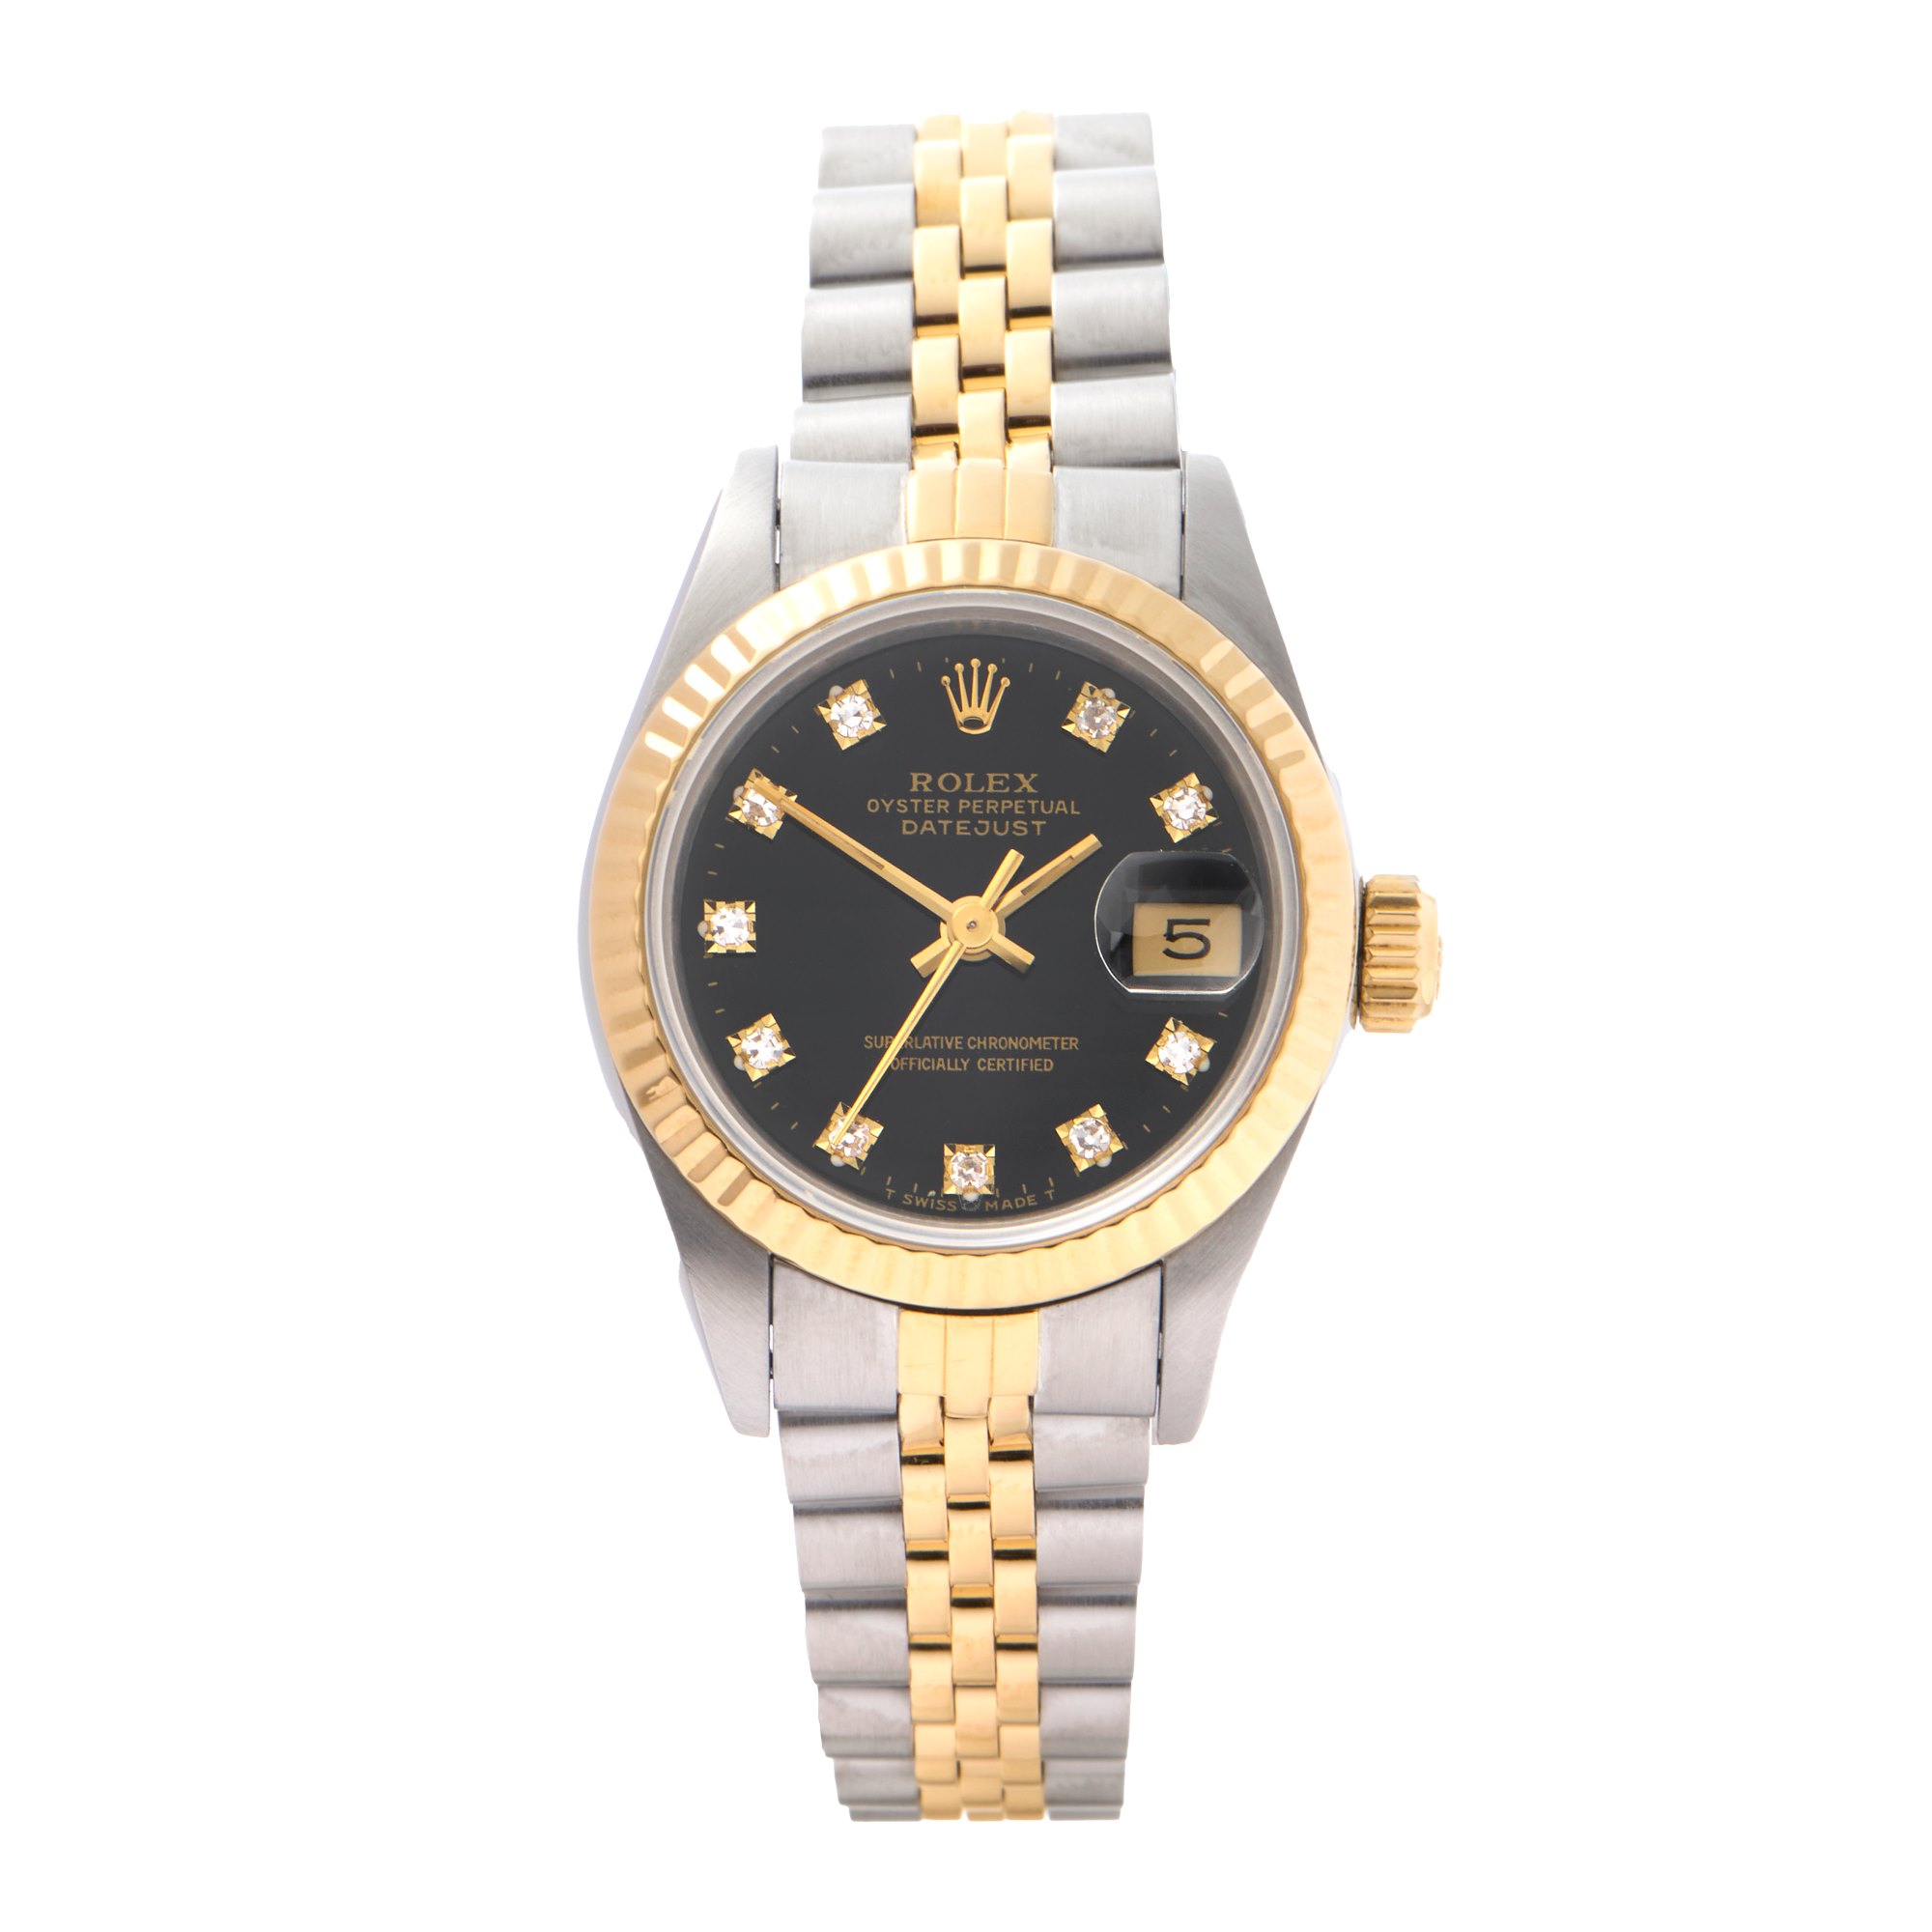 Rolex Datejust 26 18K Yellow Gold & Stainless Steel 69173